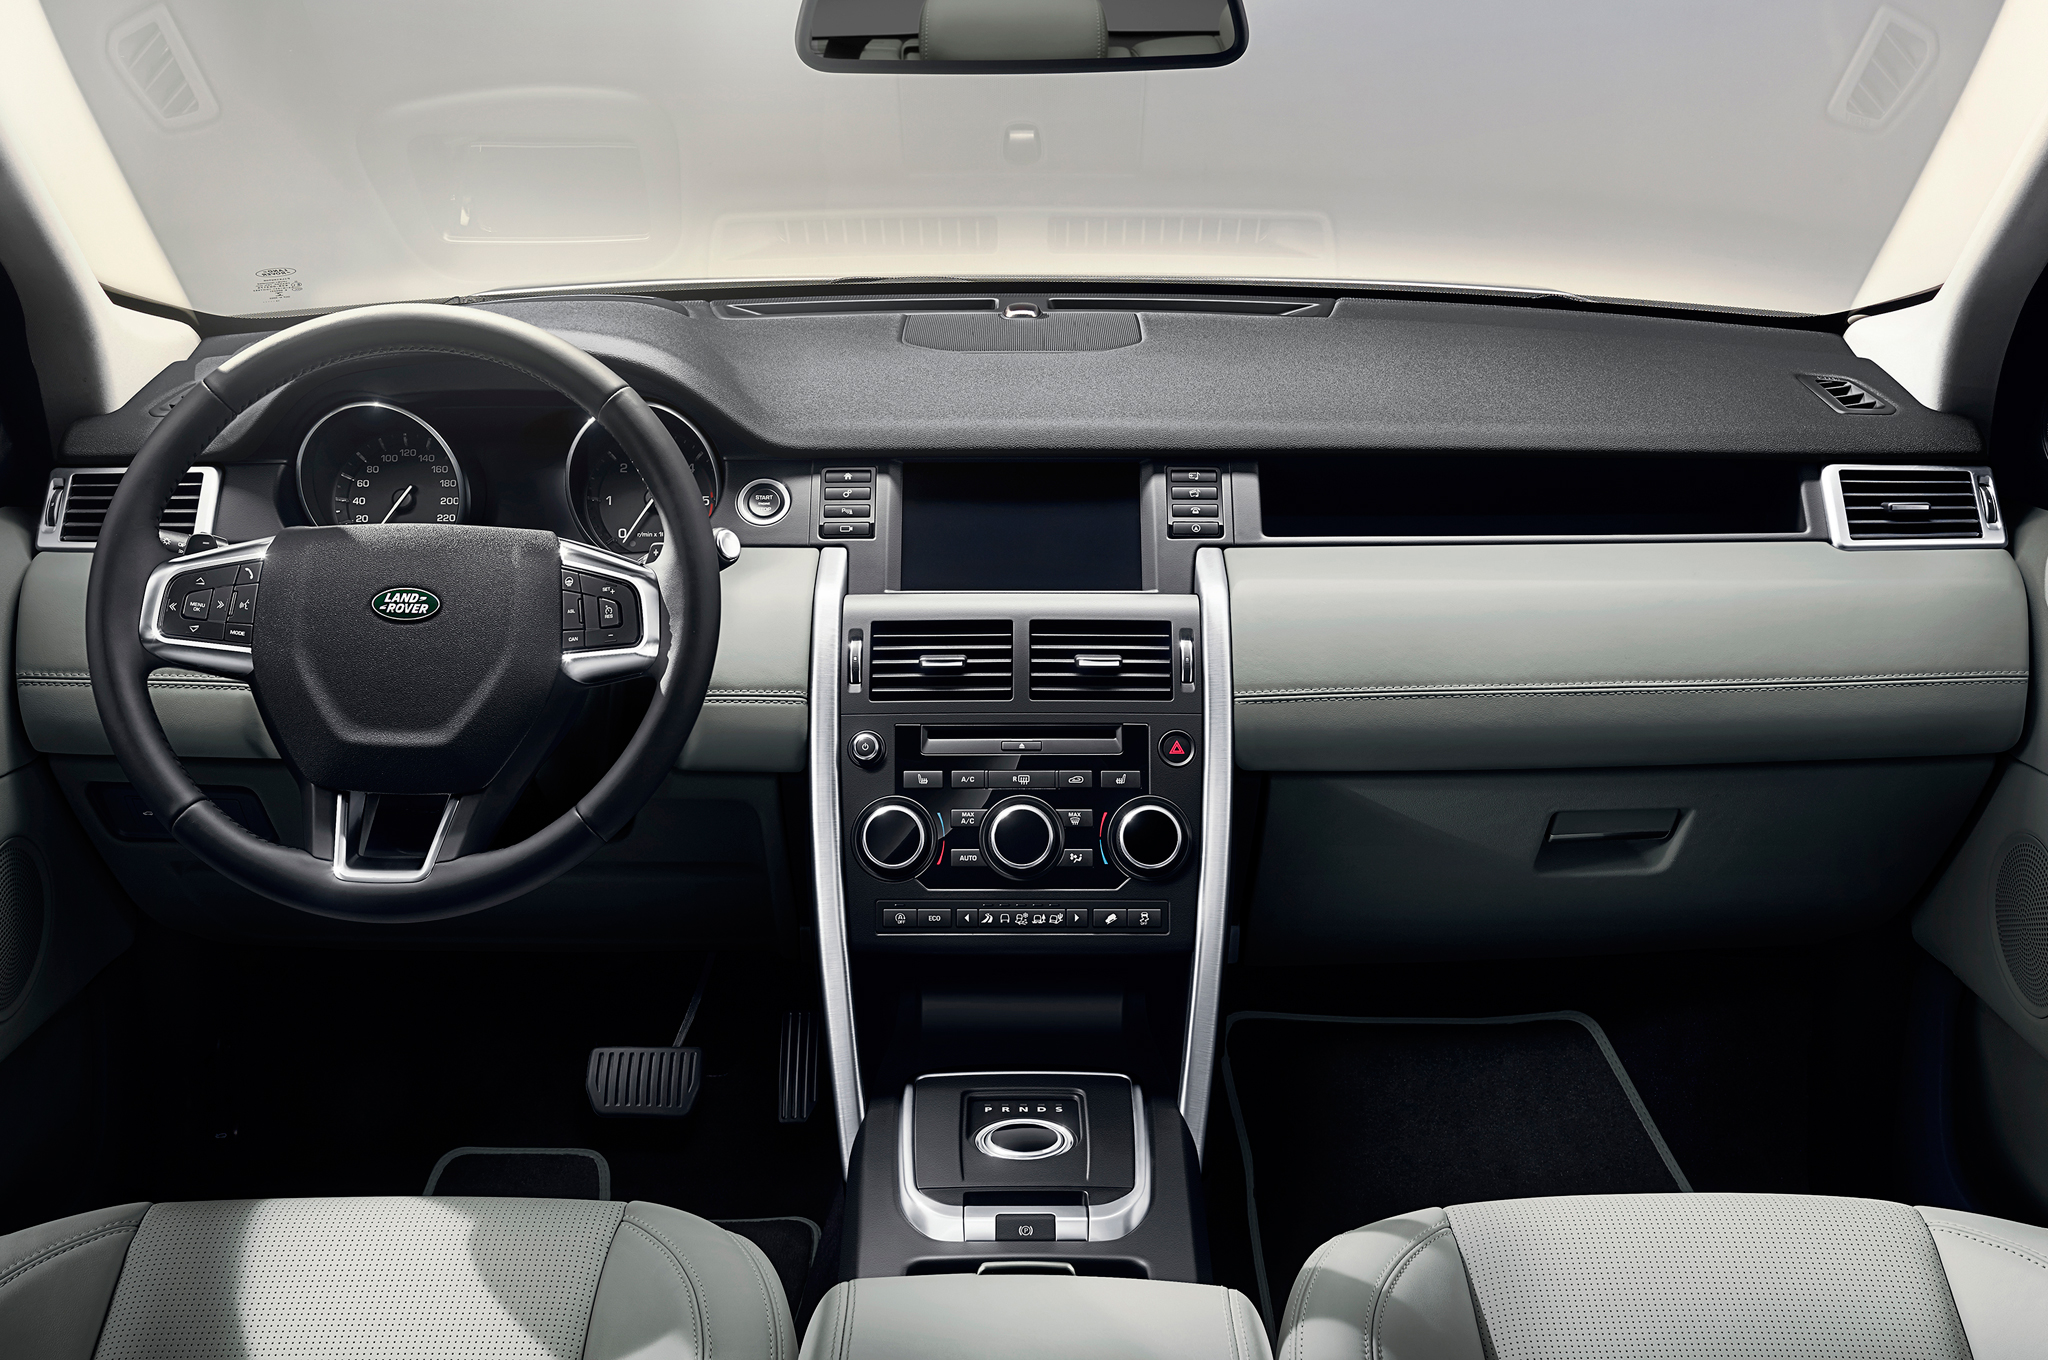 2015-land-rover-discovery-interior.jpg